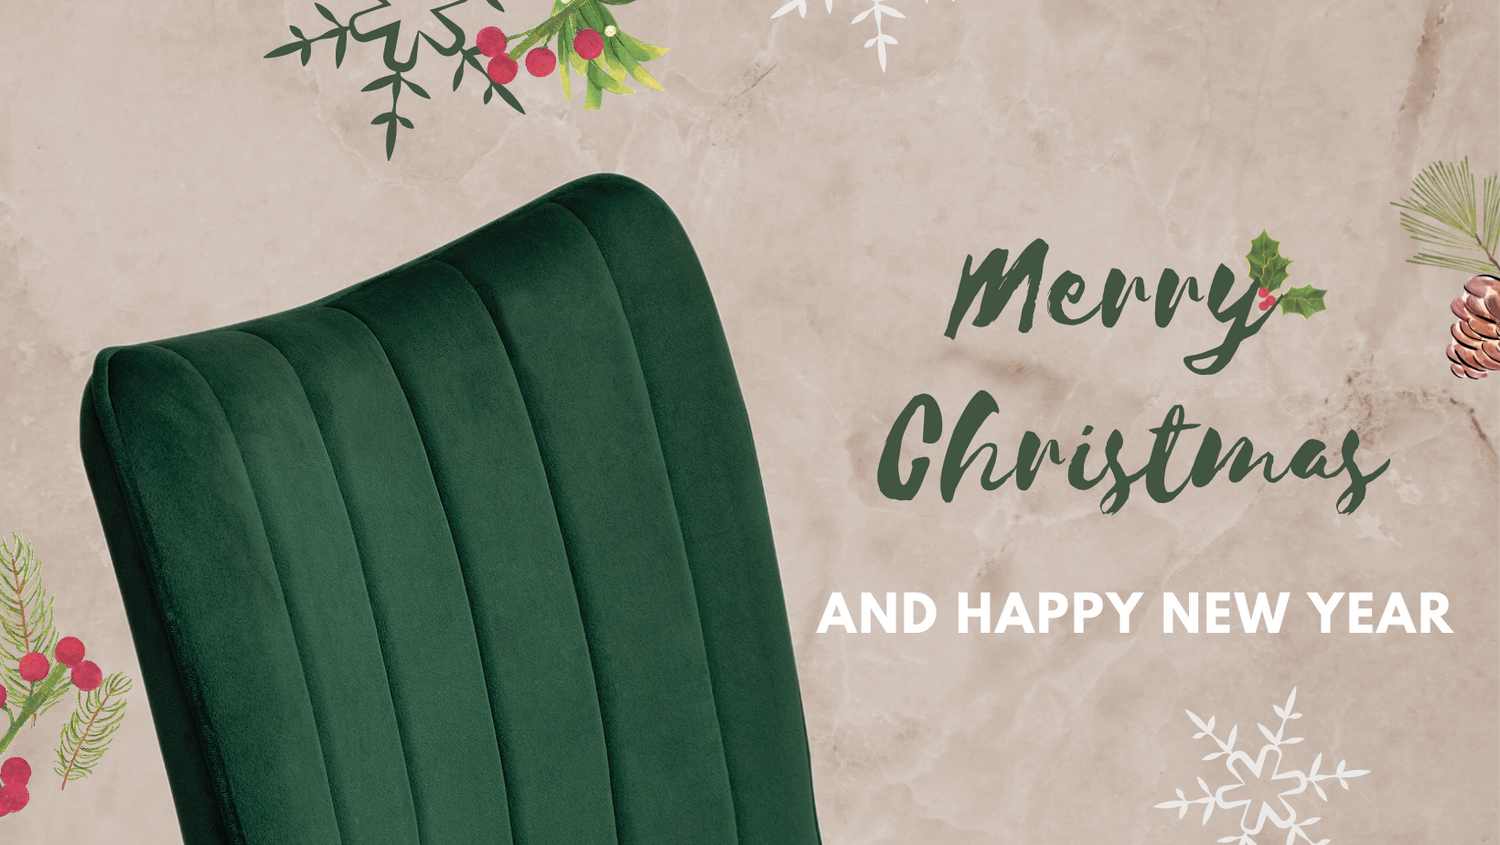 Create a Christmas atmosphere with dining chairs